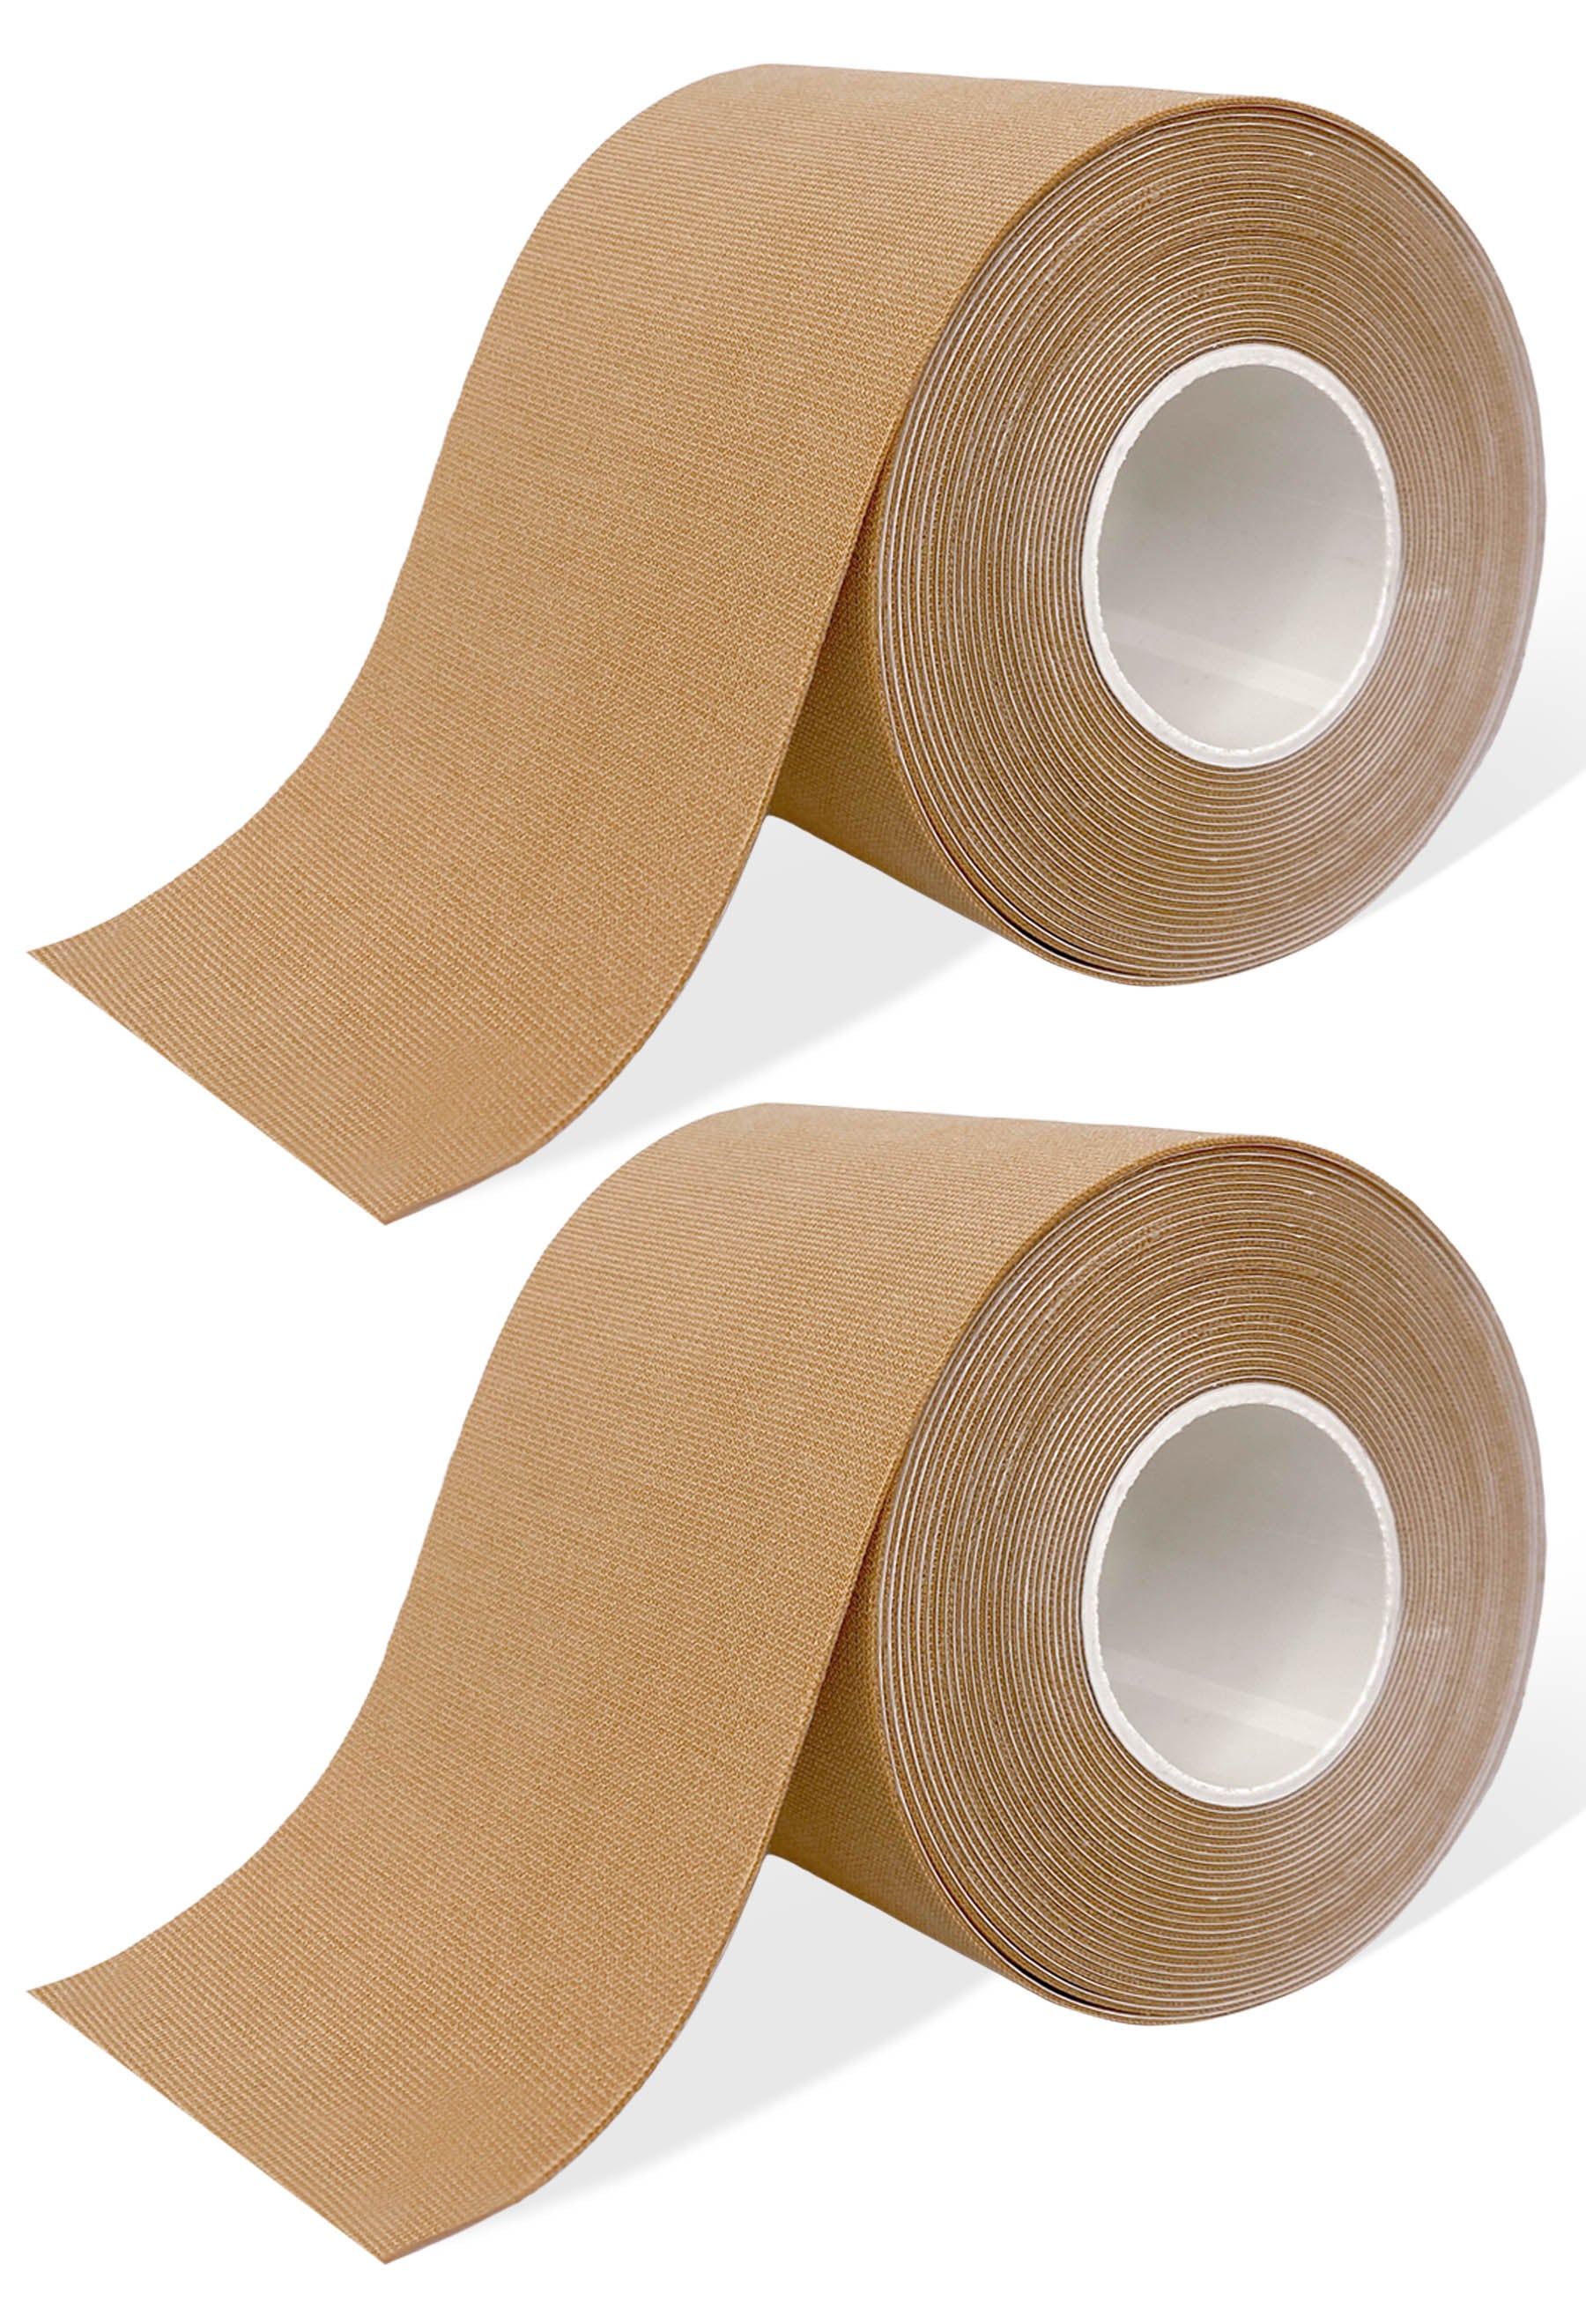 Support Body Tape Roll 2 Pack, Booby Tape